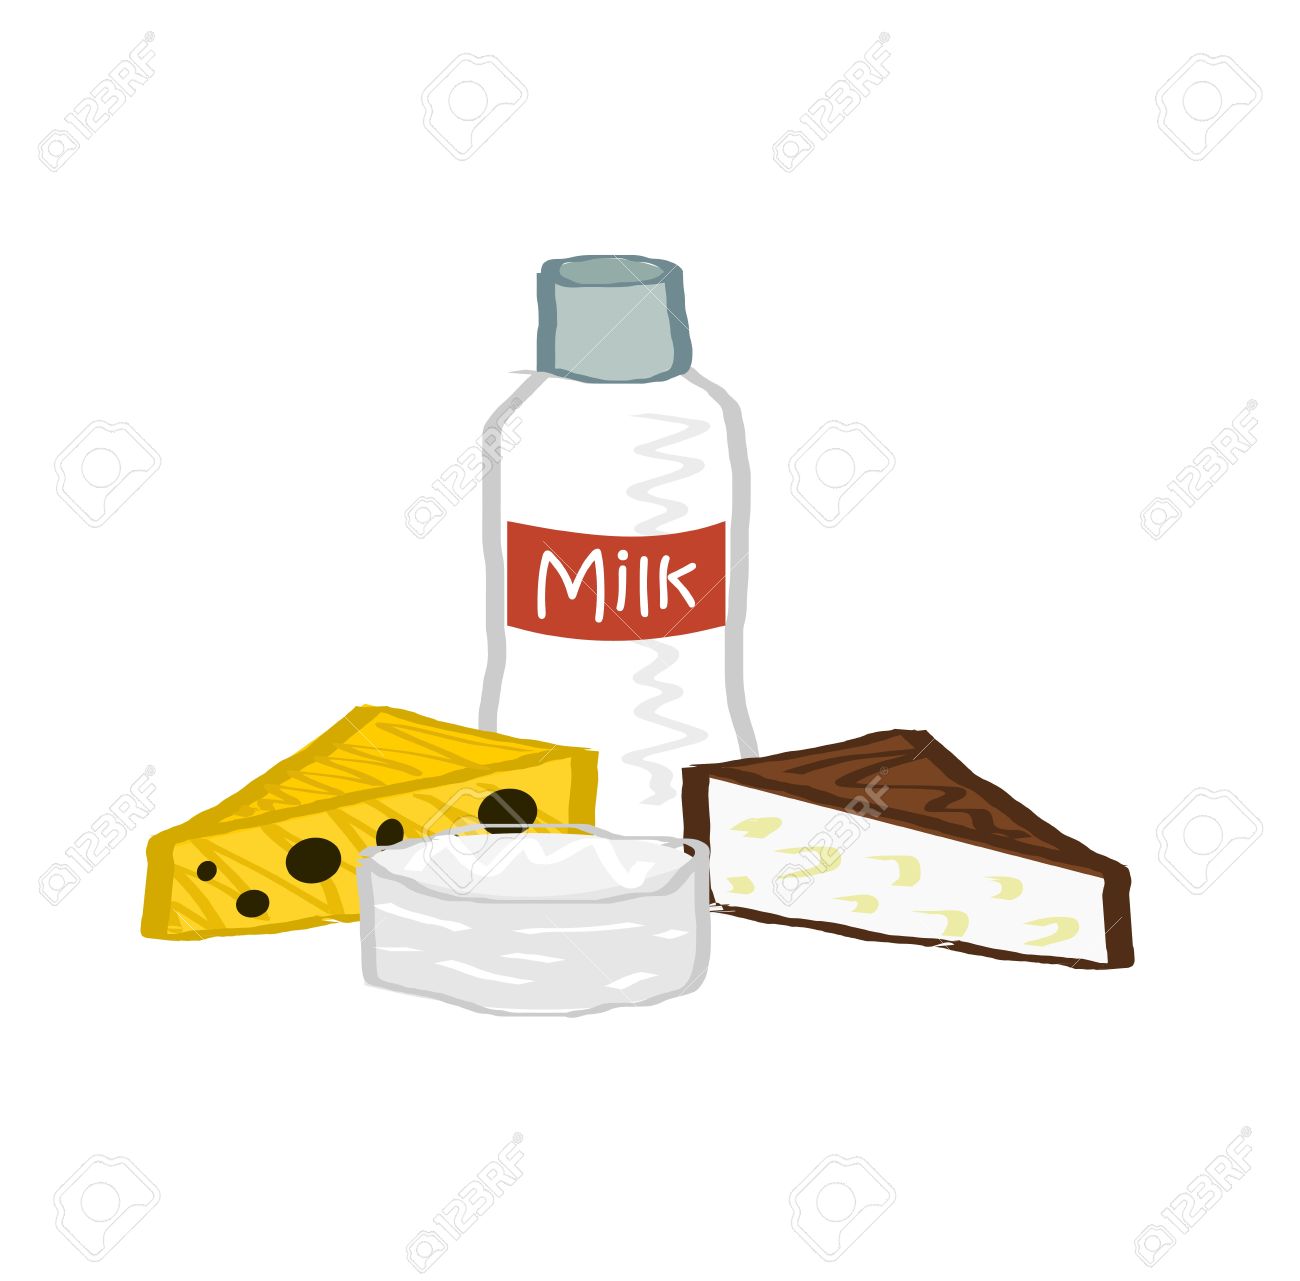 Goat clipground milk products. Cheese clipart illustration